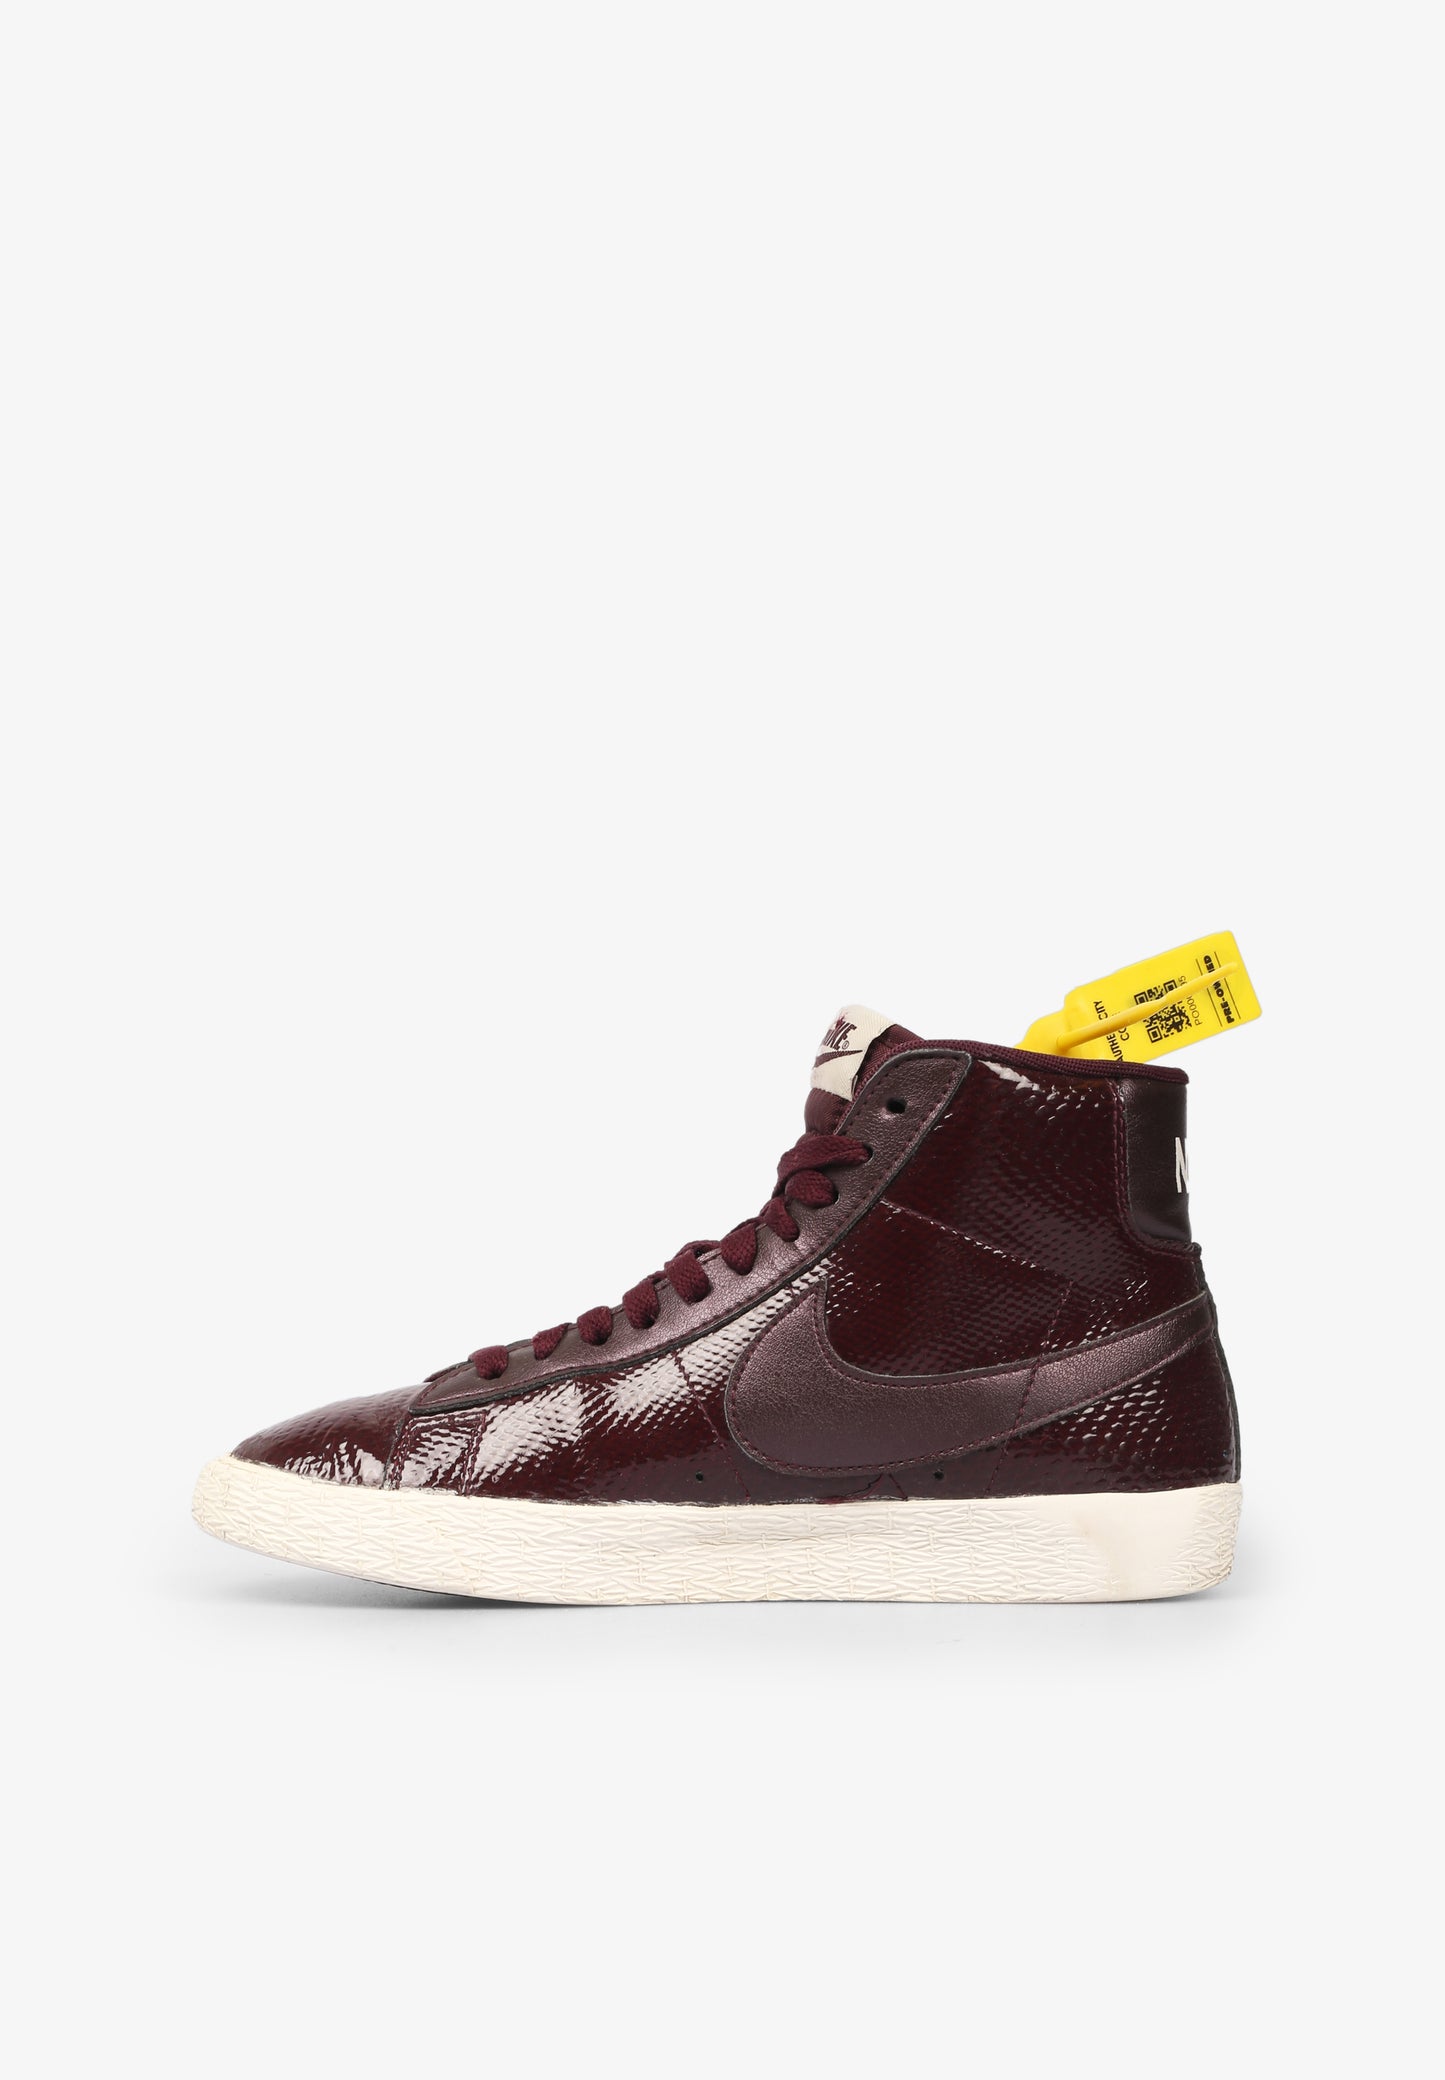 ARCHIVE SNEAKRS | SNEAKERS NIKE WMNS BLAZER MID PRM SNAKE PACK TALLA 36